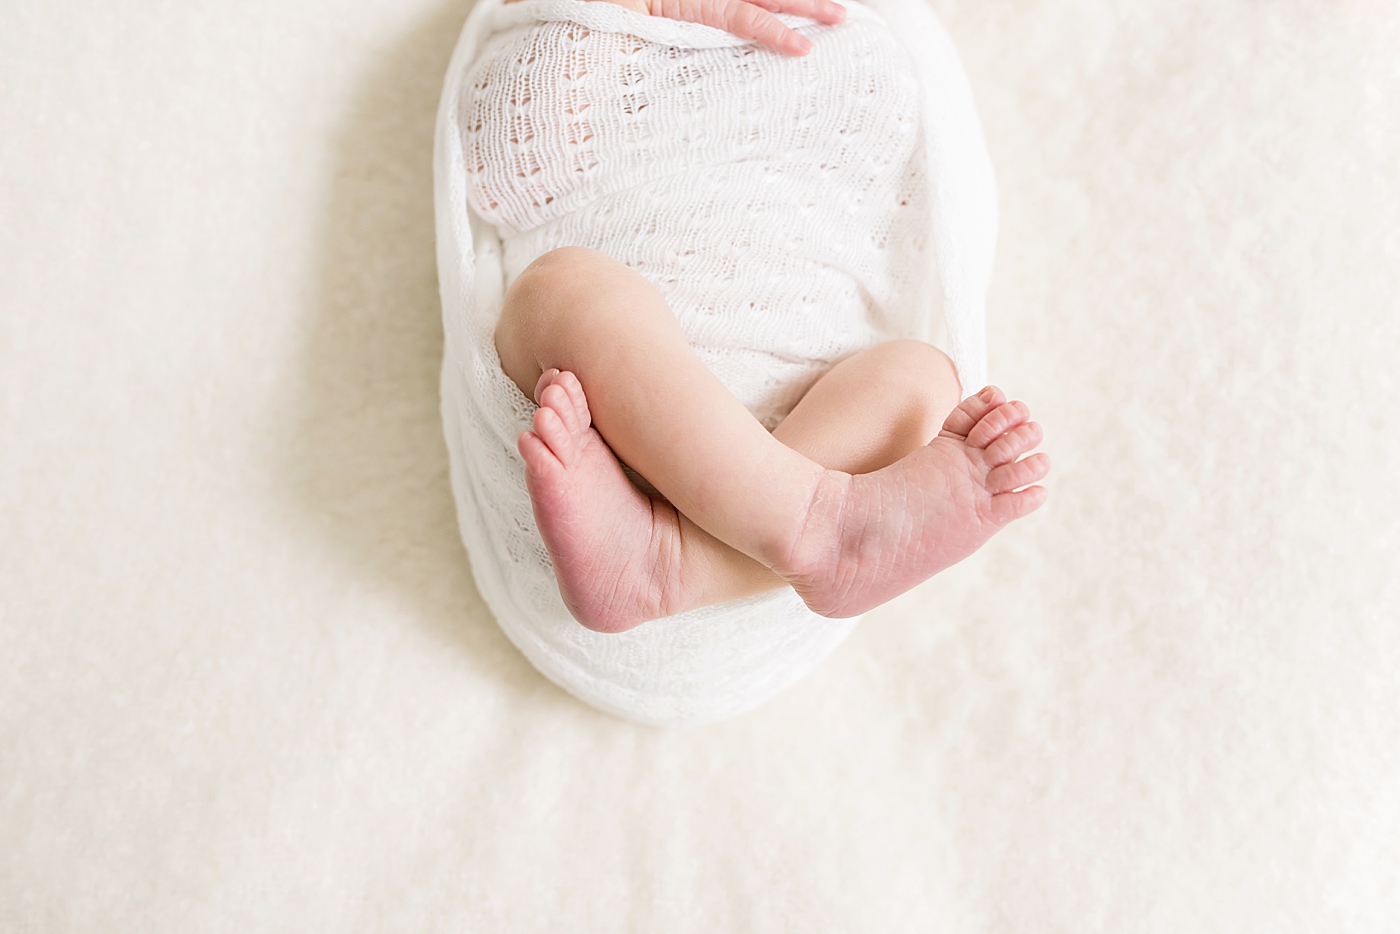 Detail photo of newborn baby girl wrapped in white swaddle | Photo by Anna Wisjo Photography